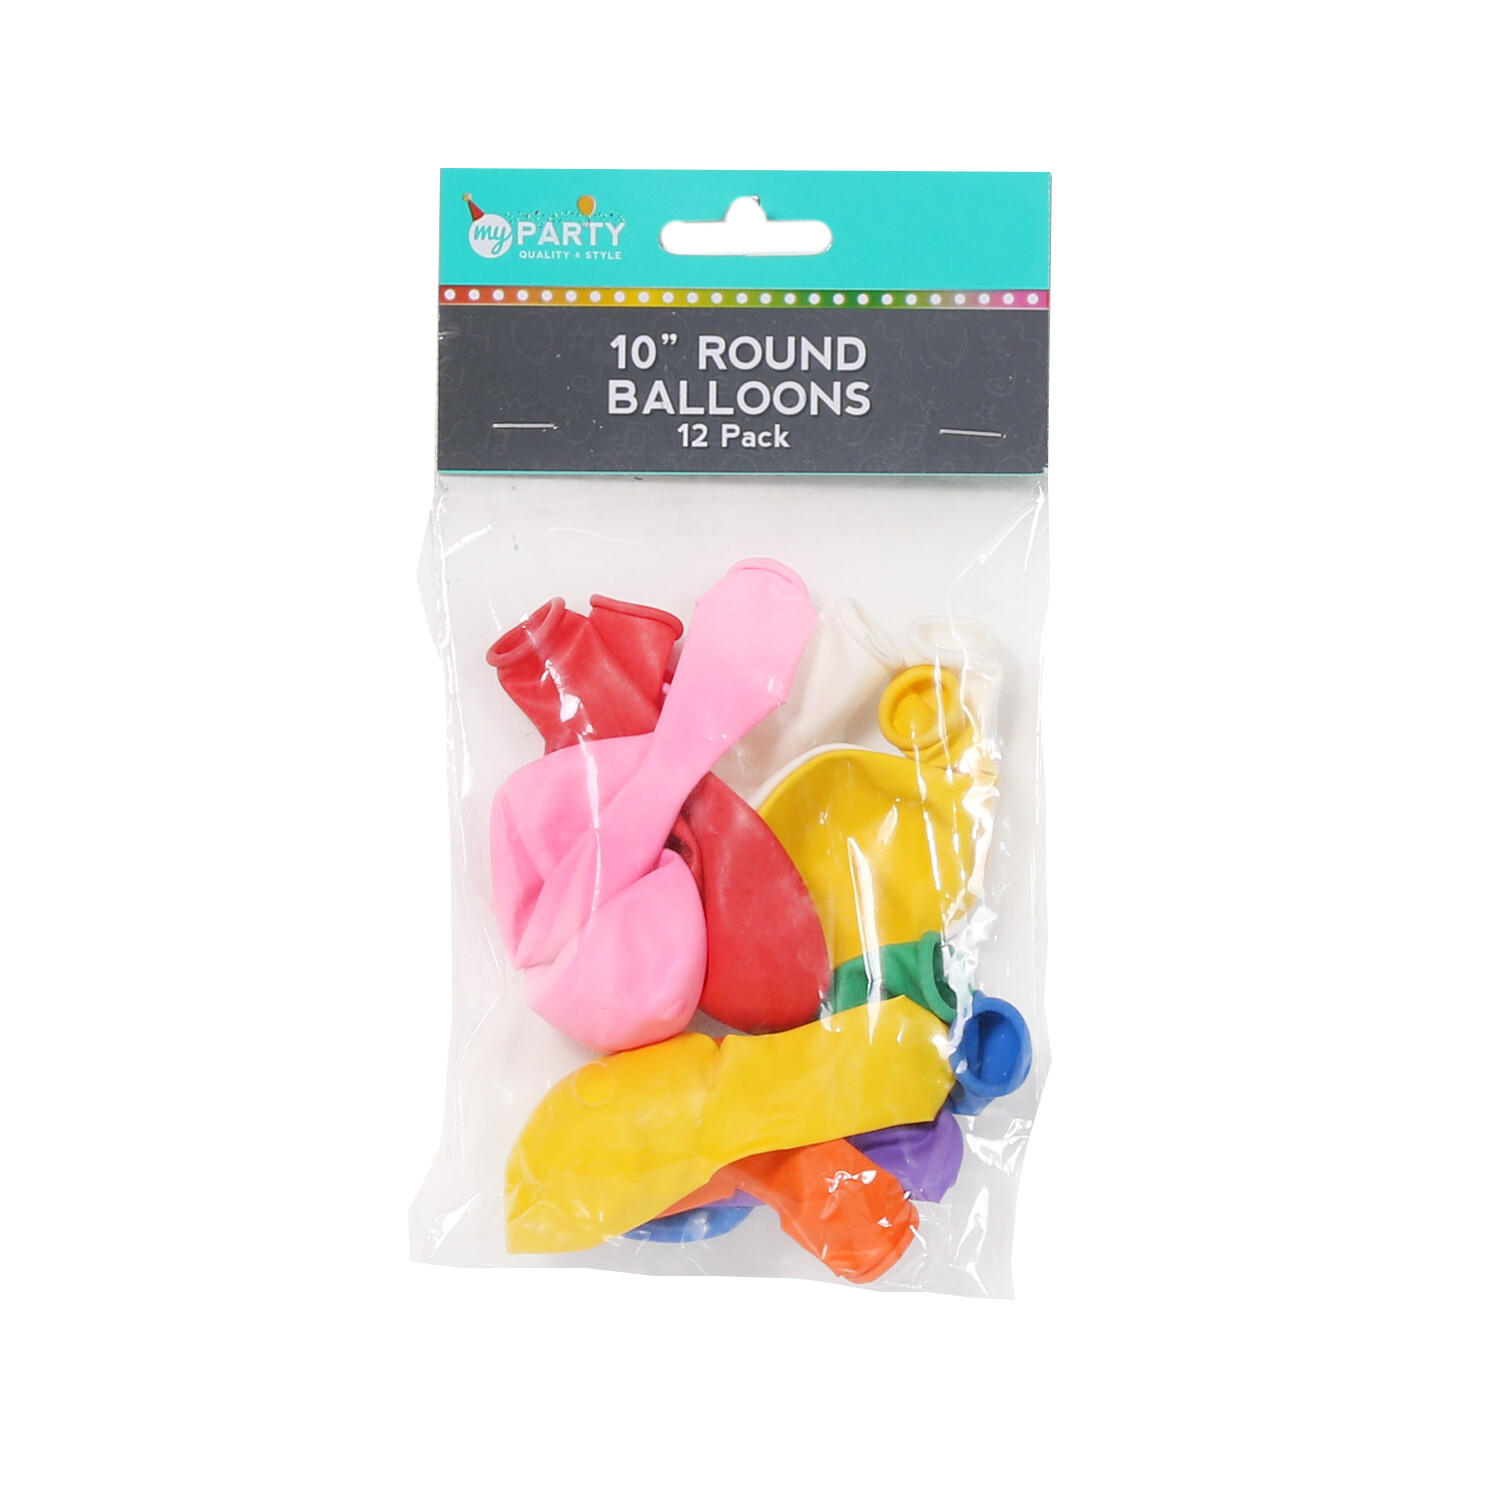 Pack of 10" Round Balloons - 12 Image